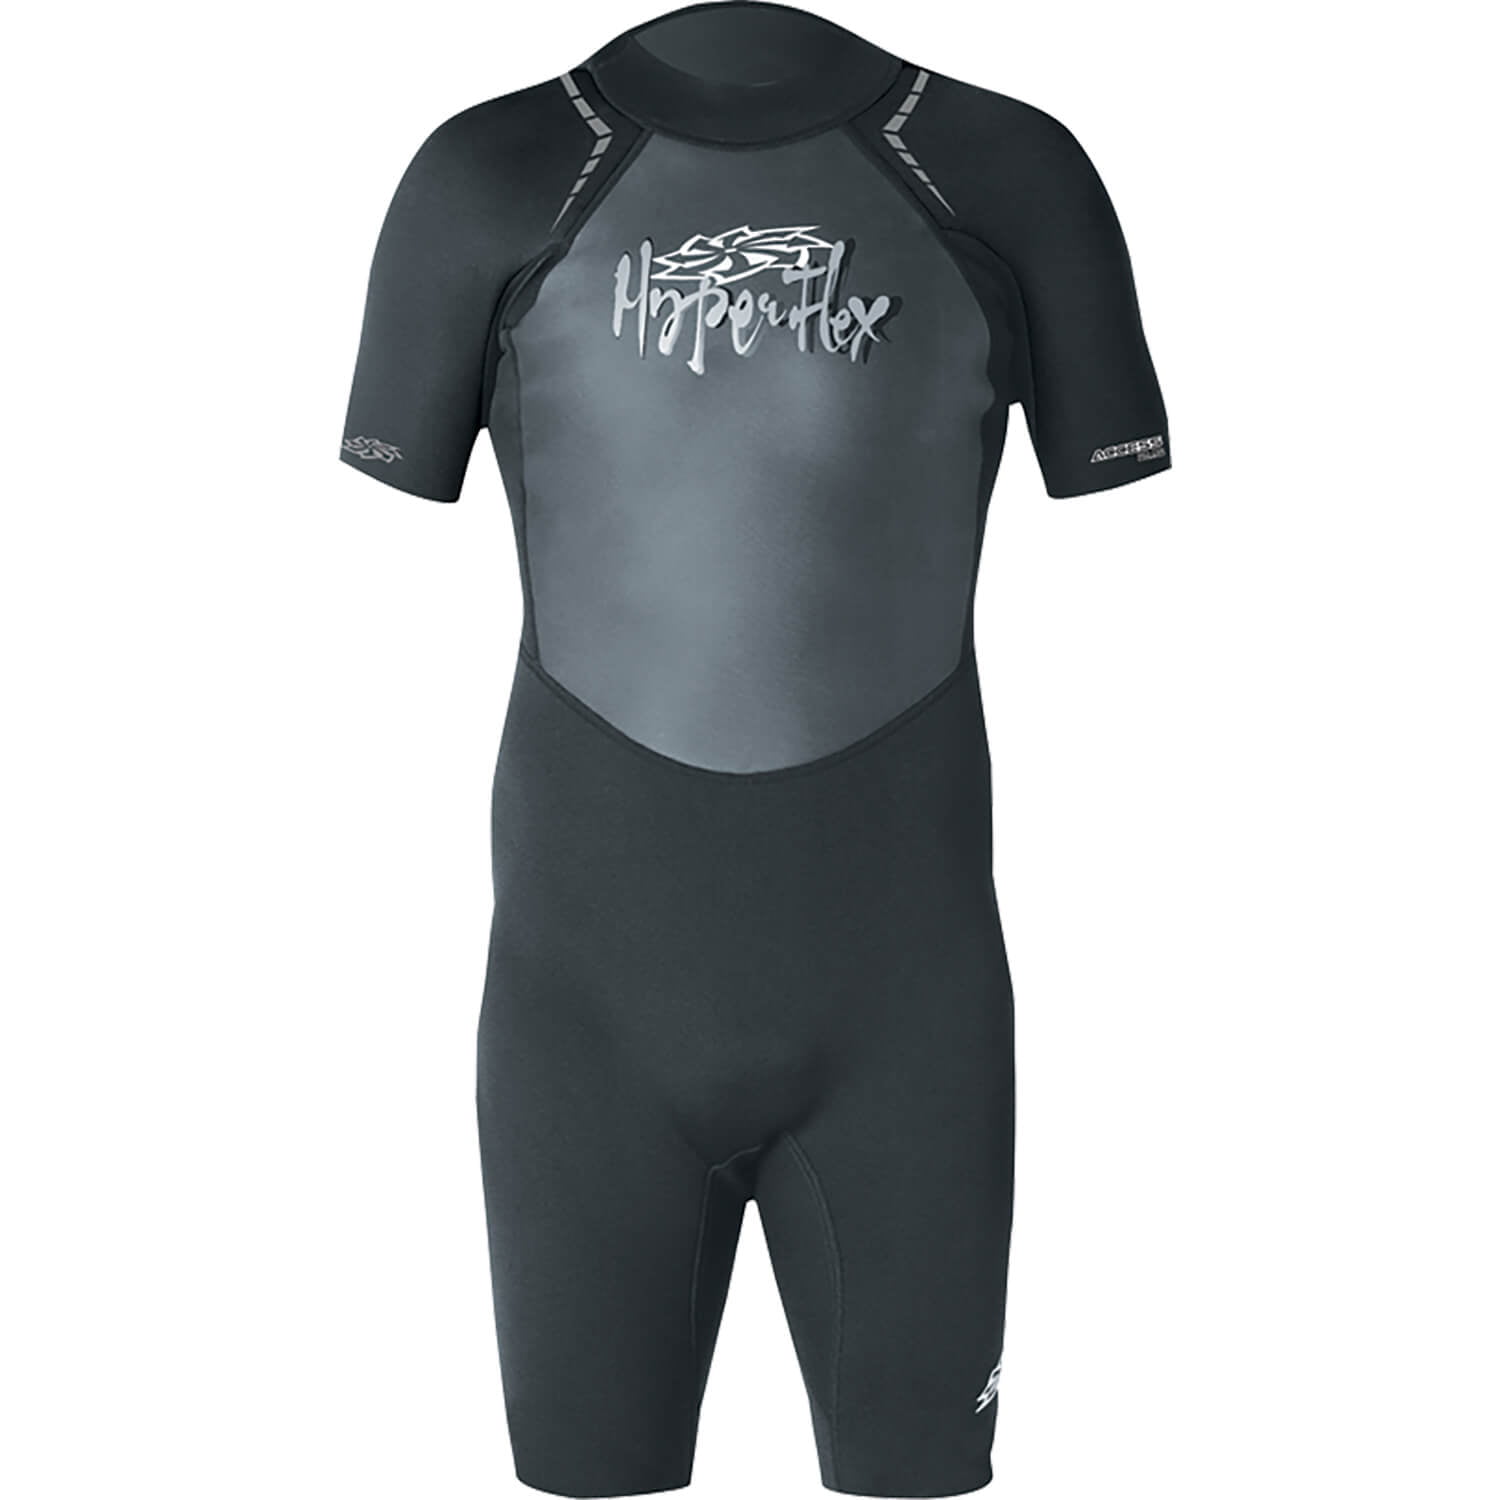 Cressi Baby Shorty Kids Shortie Wetsuit Neoprene Spring Suit Size MD 